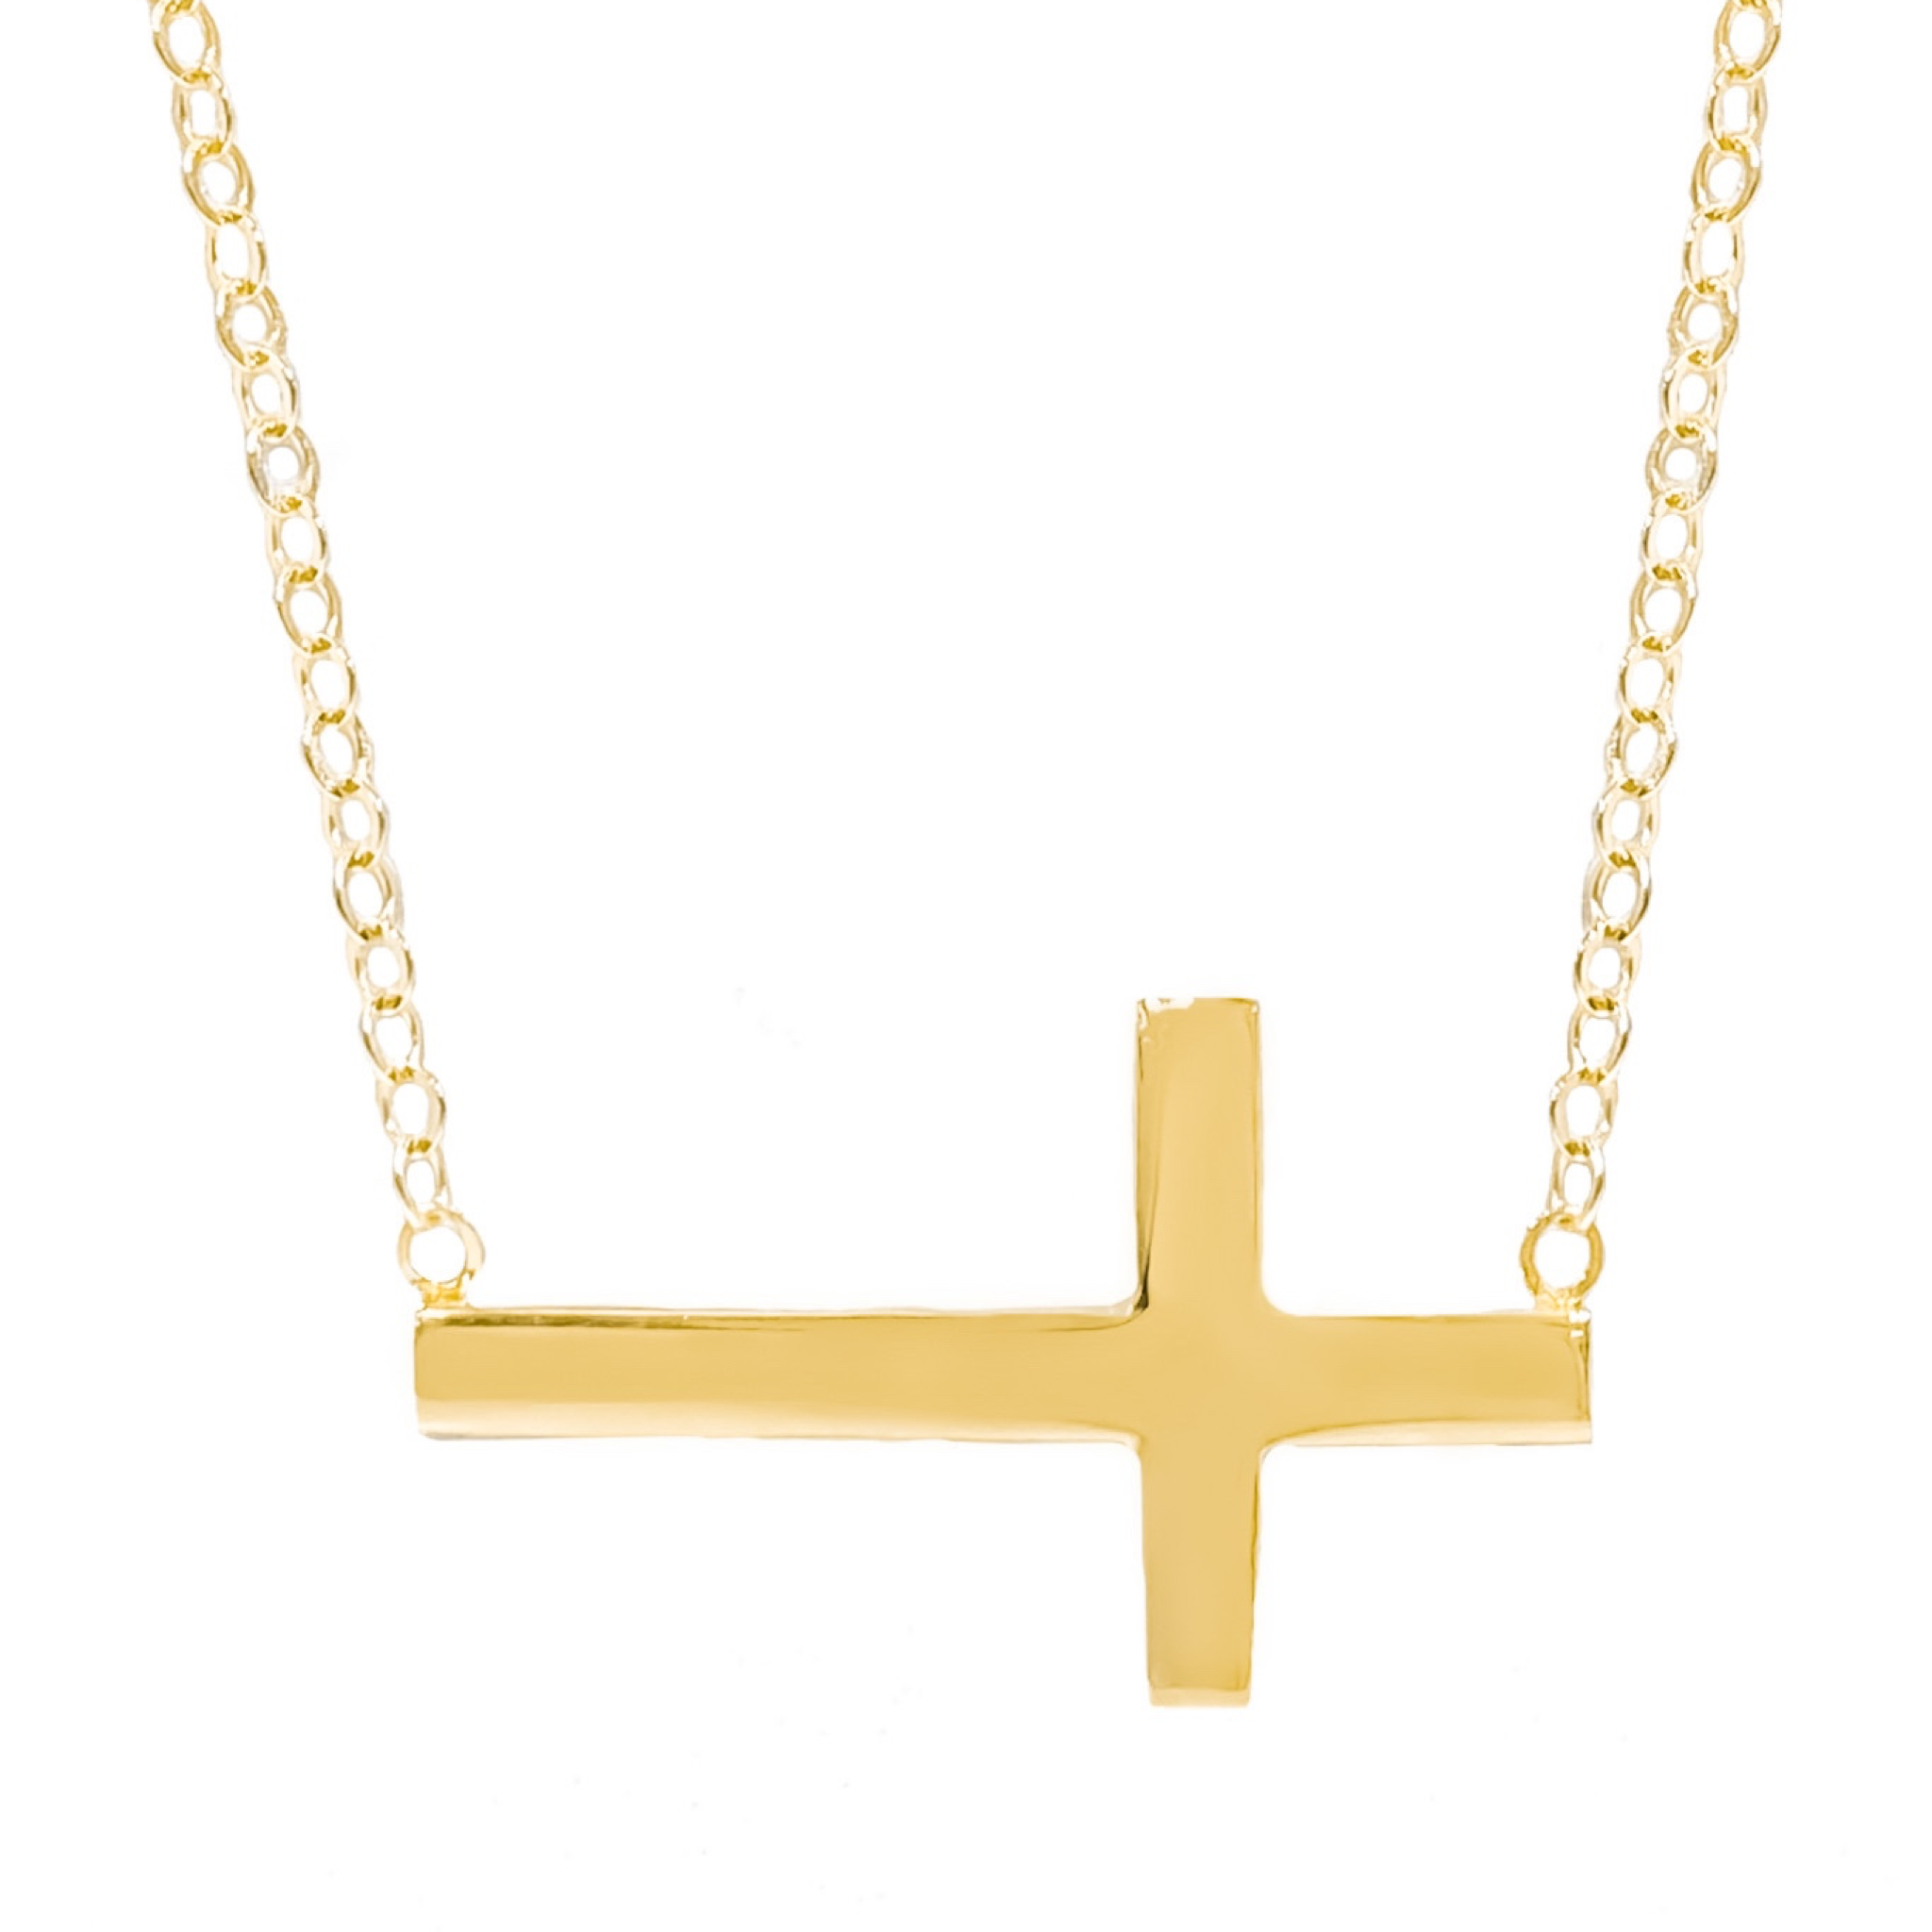 14K YELLOW GOLD ROLO CROSS NECKLACE